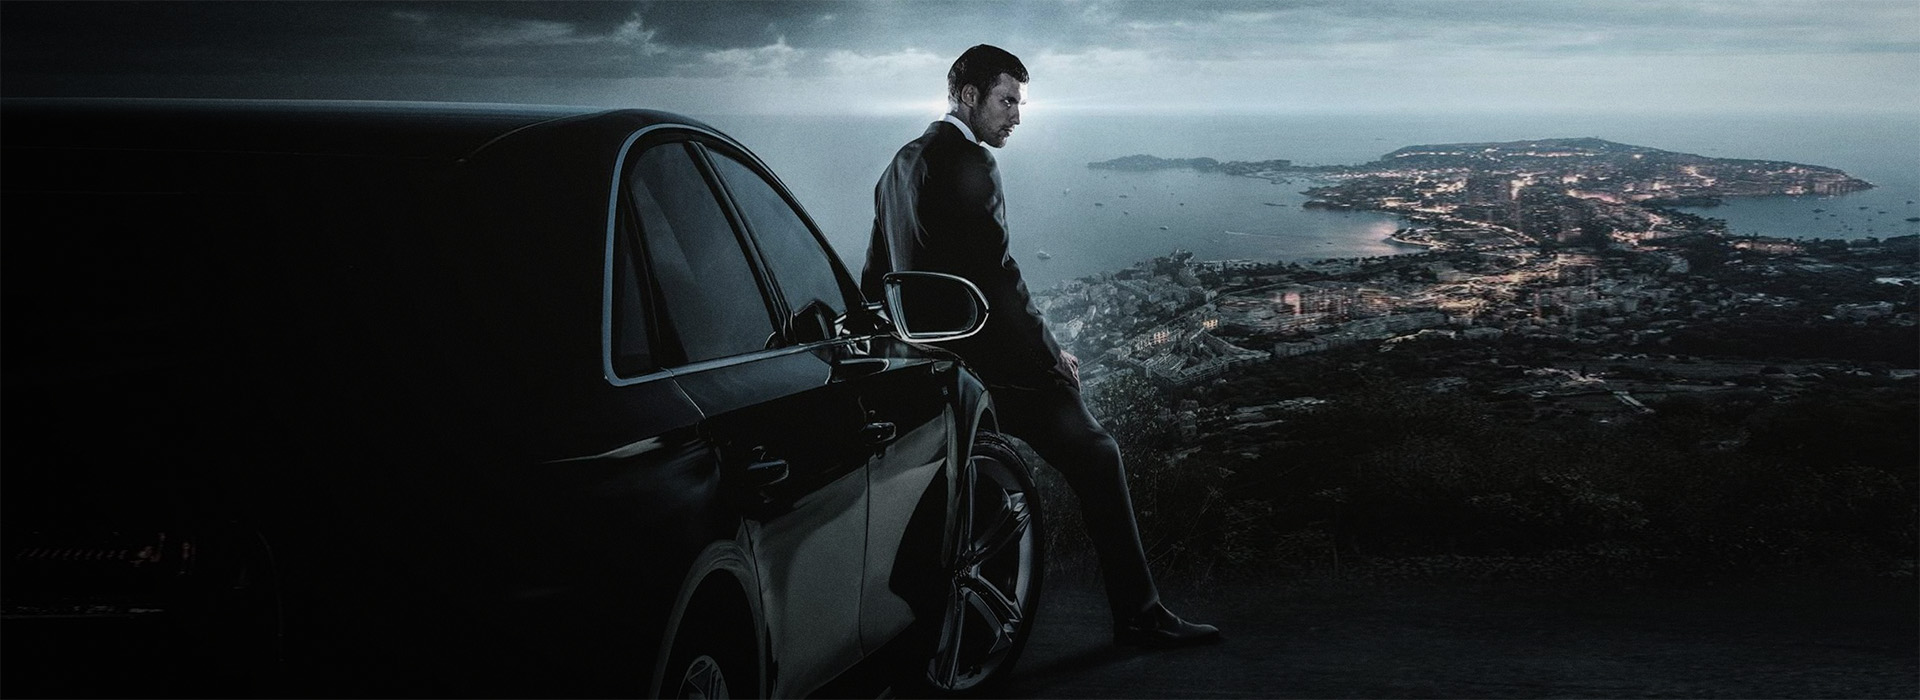 Movie poster The Transporter Refueled